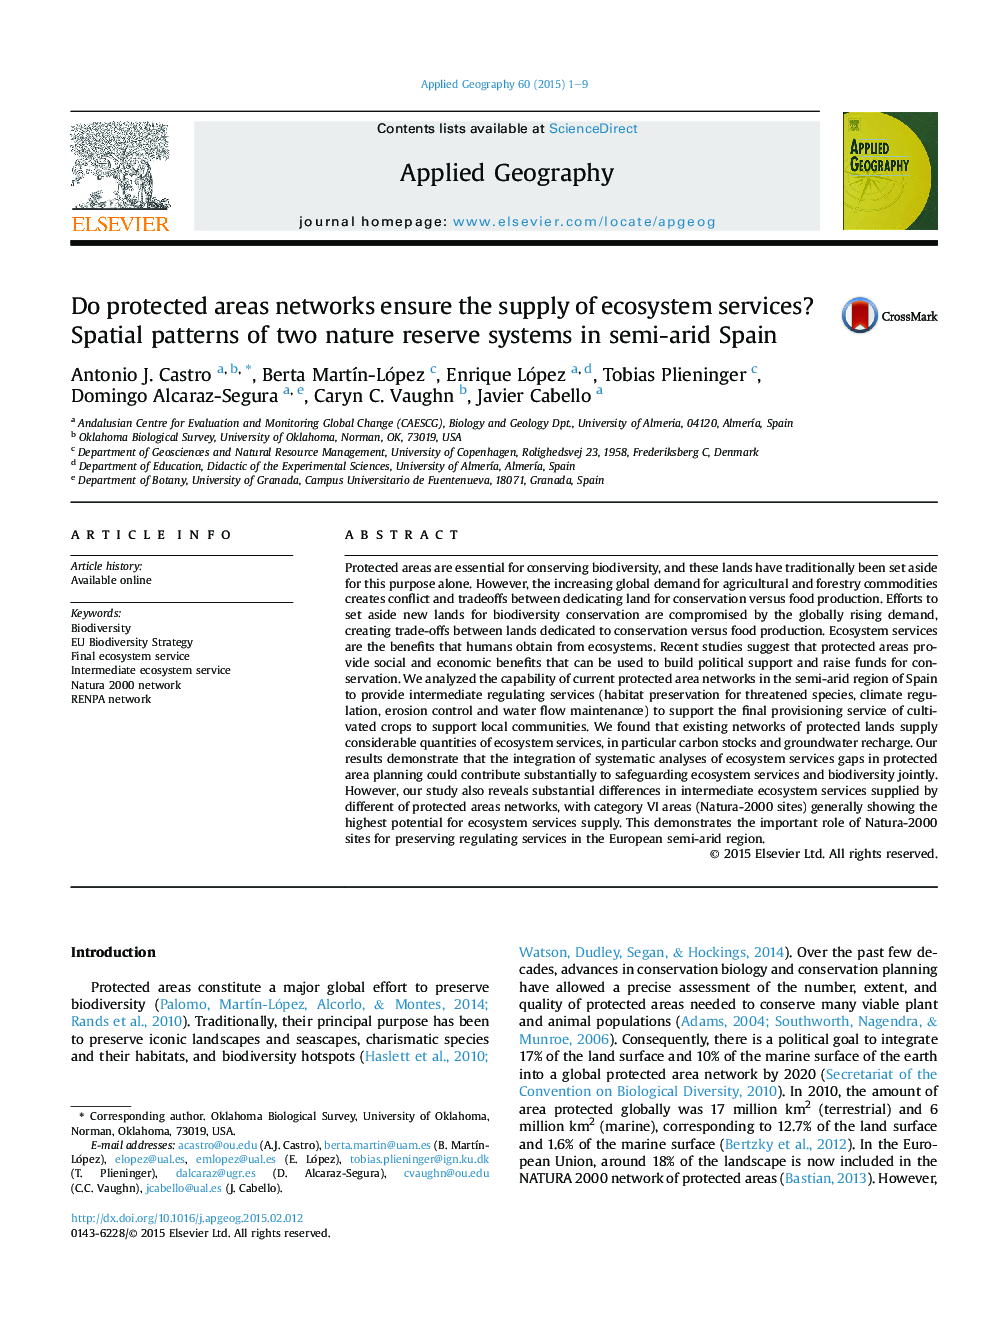 Do protected areas networks ensure the supply of ecosystem services? Spatial patterns of two nature reserve systems in semi-arid Spain